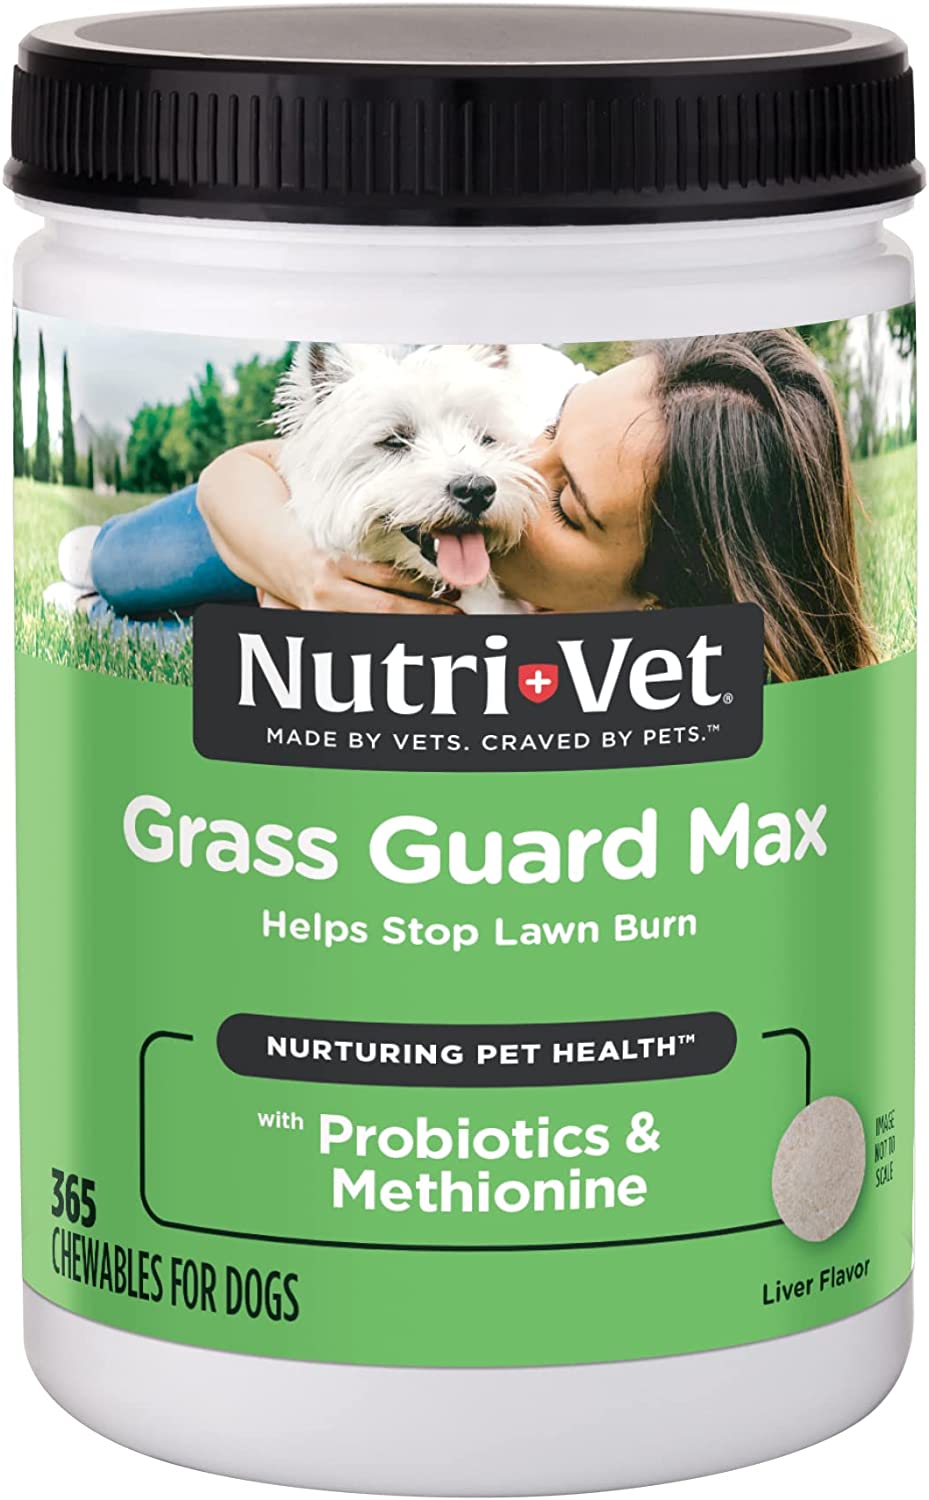 5. Nutri-Vet Grass Guard Chewables for Dogs